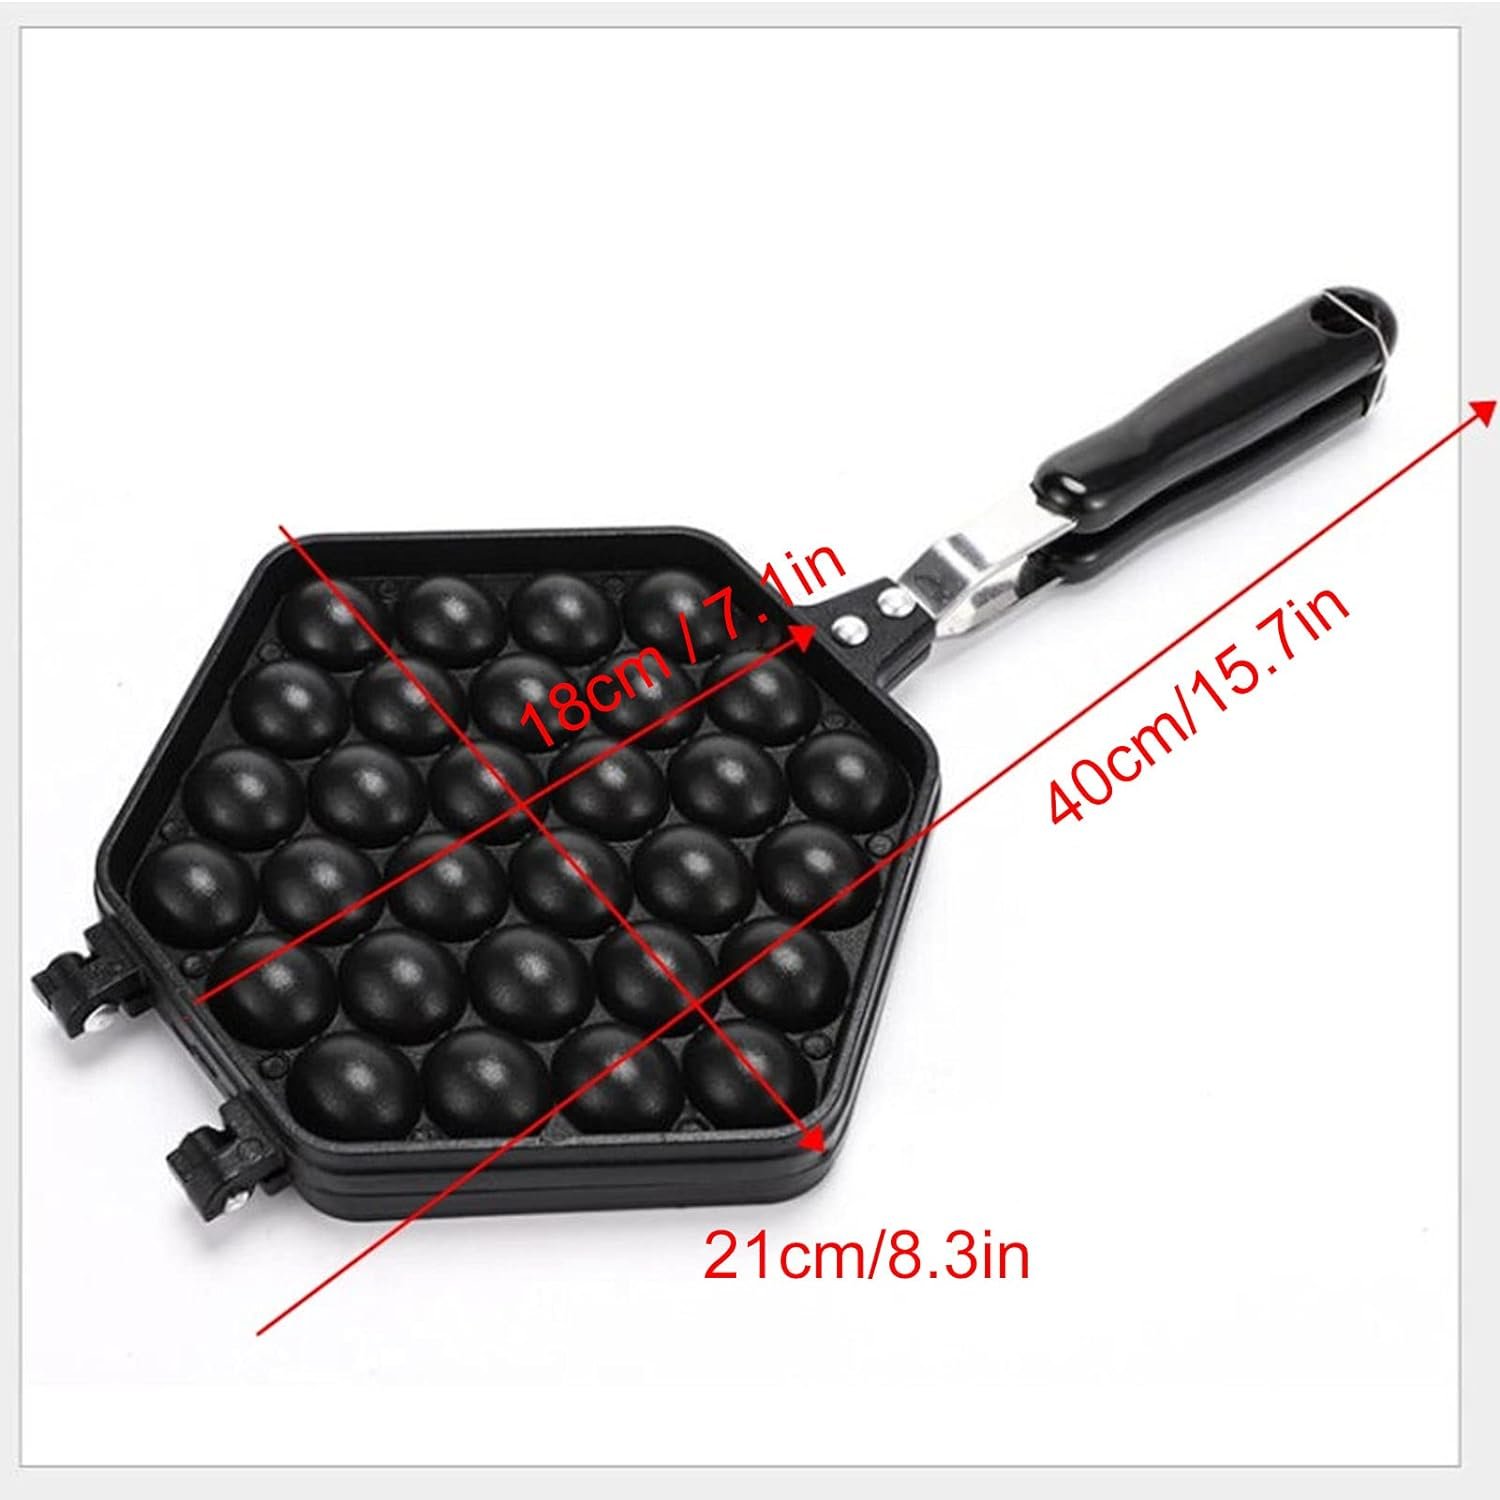 30-Hole Egg Puff Maker Non-Stick Aluminium Alloy Egg Puff Mold Pan for Home Kitchen Use，high temperature resistant and easy to demould